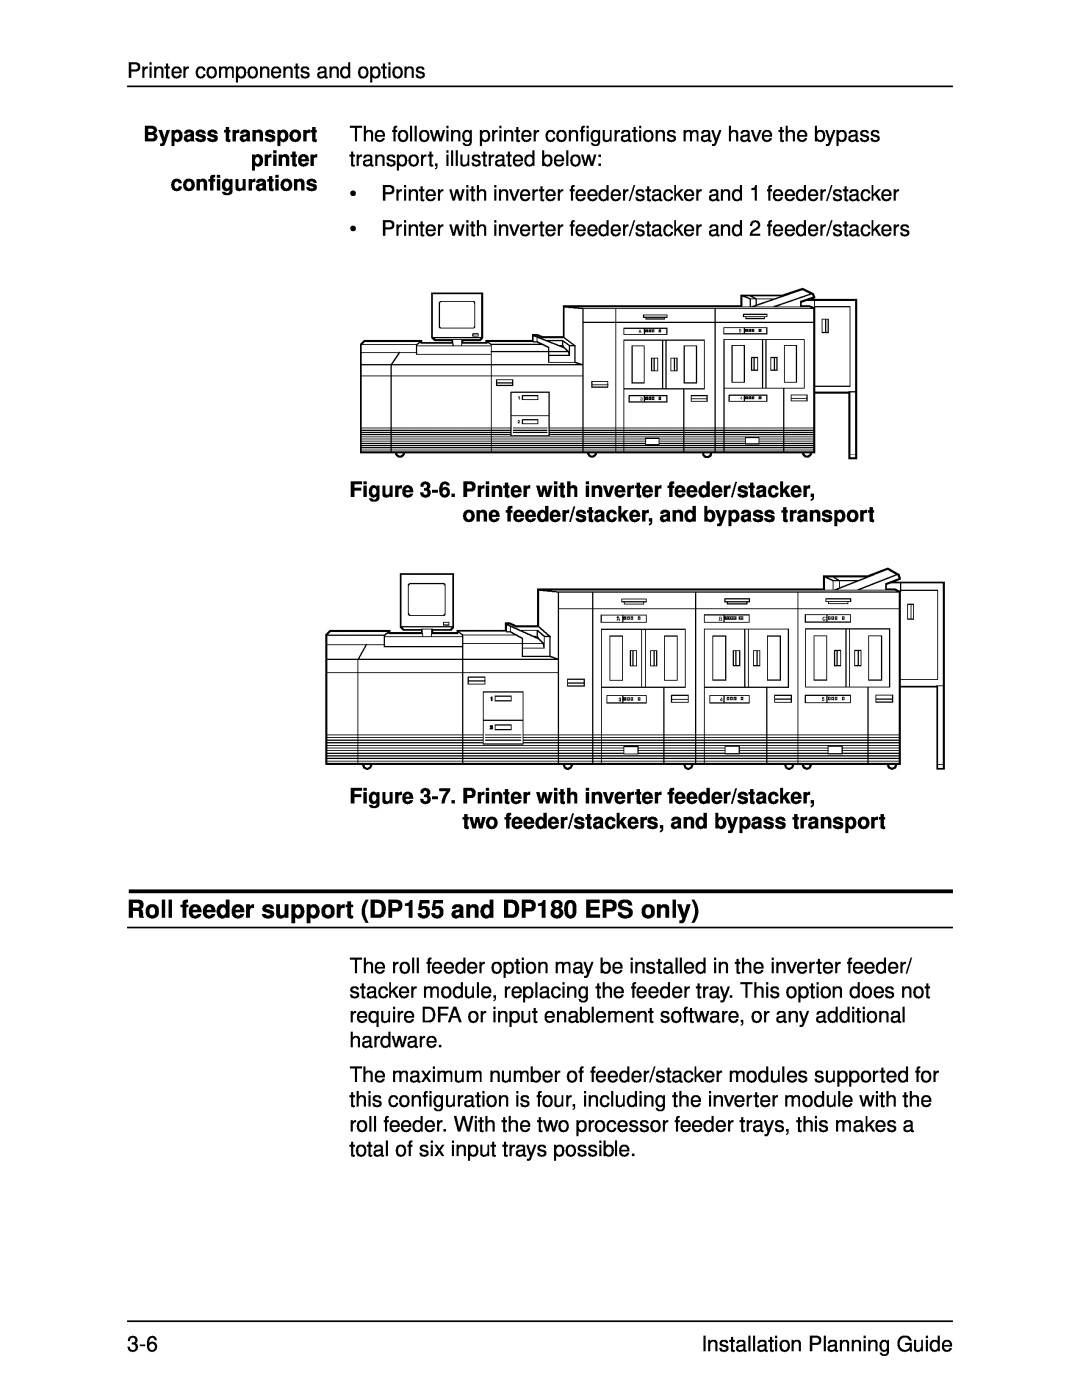 Xerox 135, 100, 155, 115 manual Bypass transport printer configurations, 6. Printer with inverter feeder/stacker 